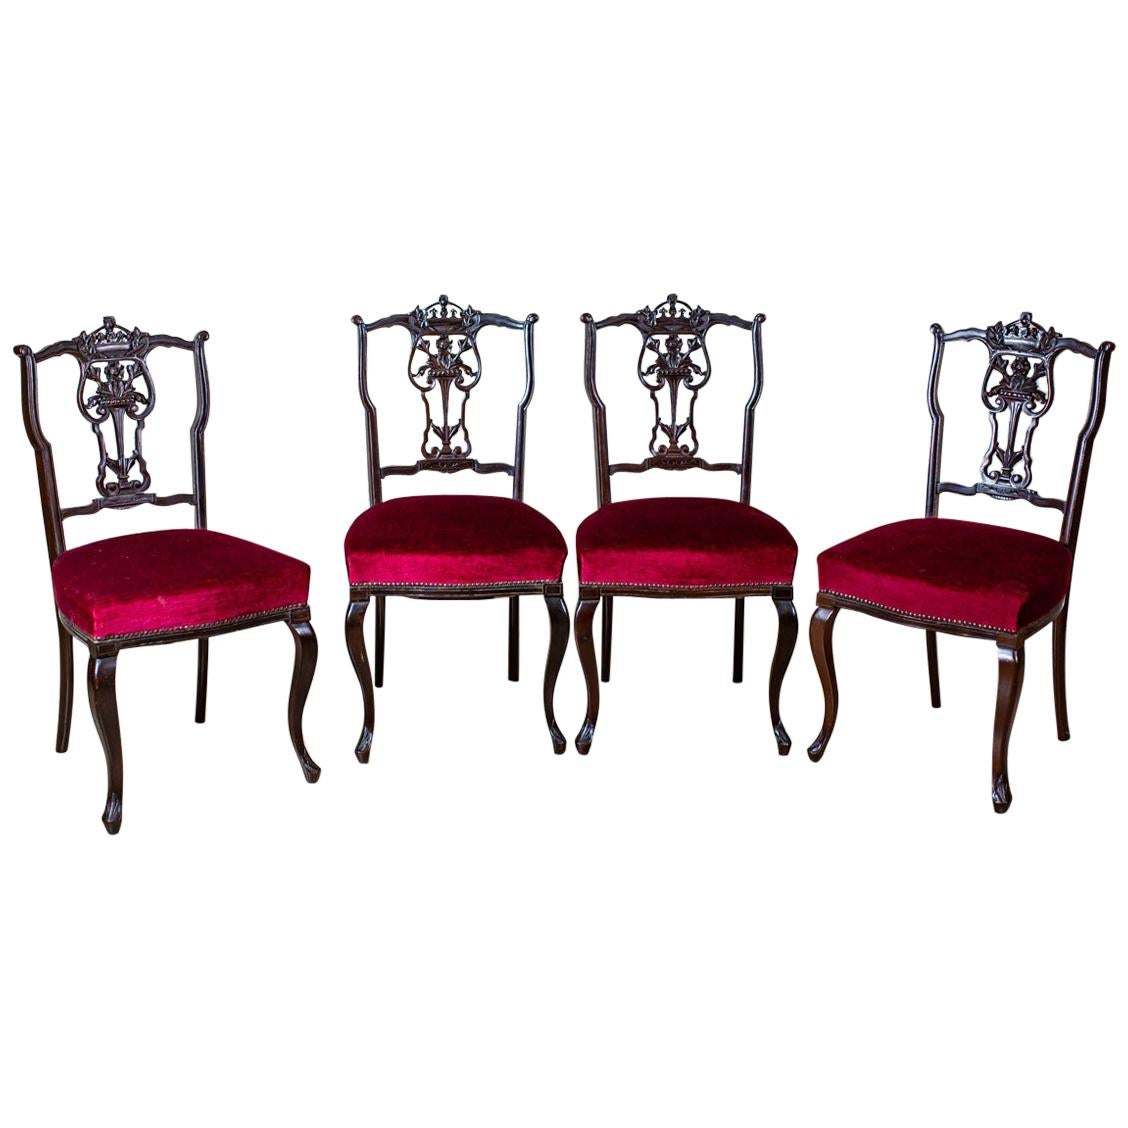 Set of Four 20th-Century Chairs with Openwork Backrests in Red Upholstery